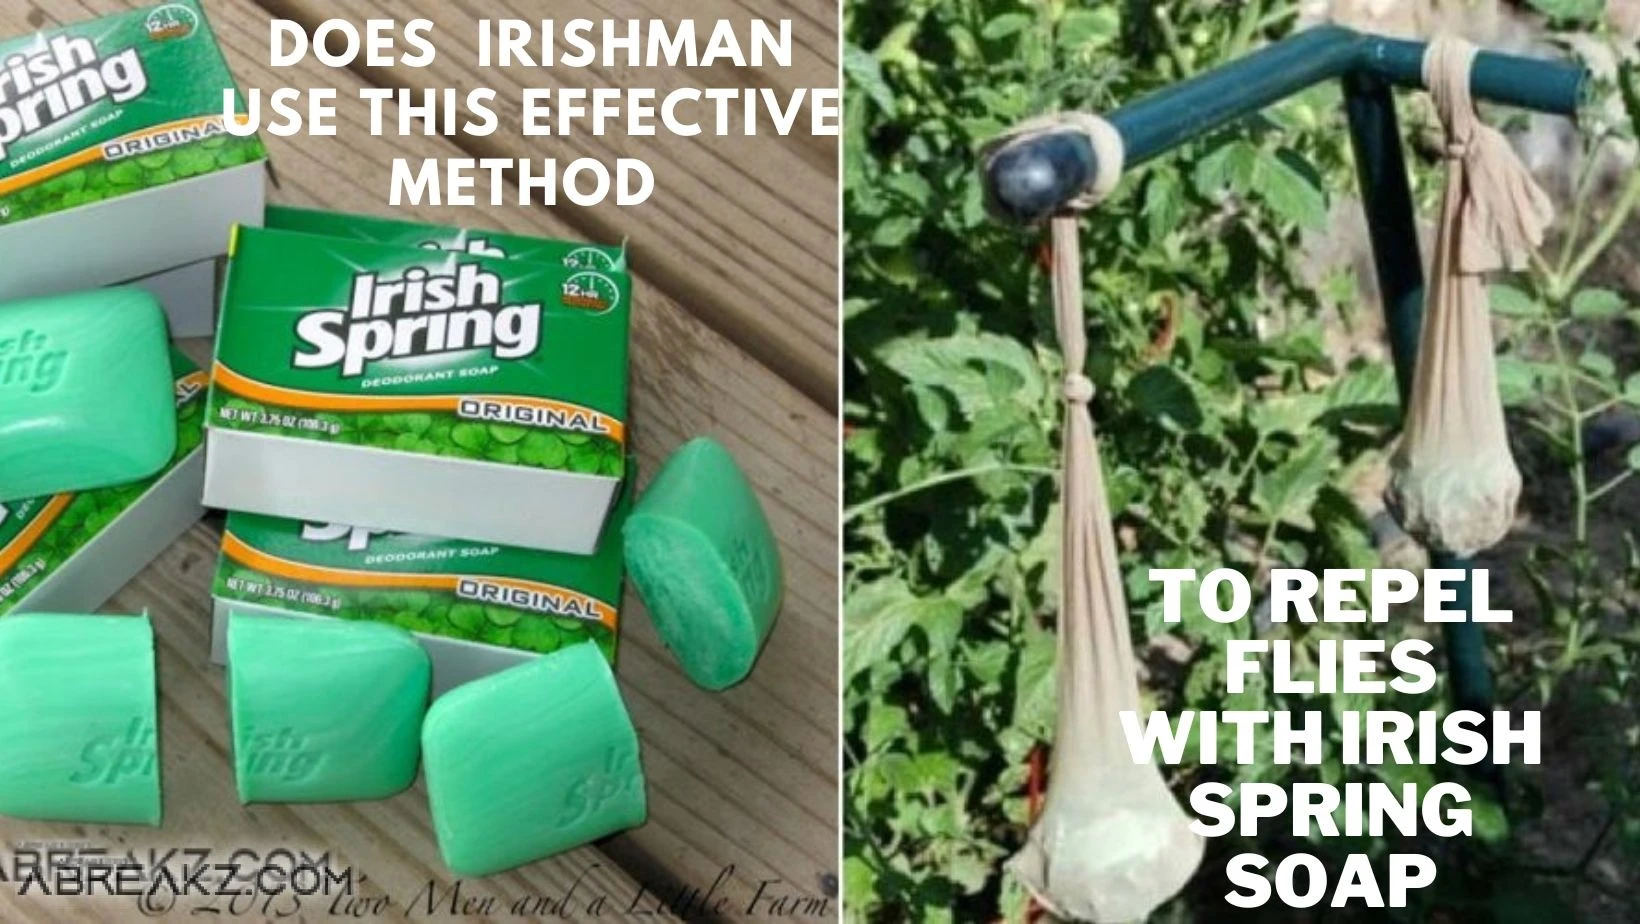 Does Irishman Use That Effective Methods To Repel Flies With Irish Spring Soap?